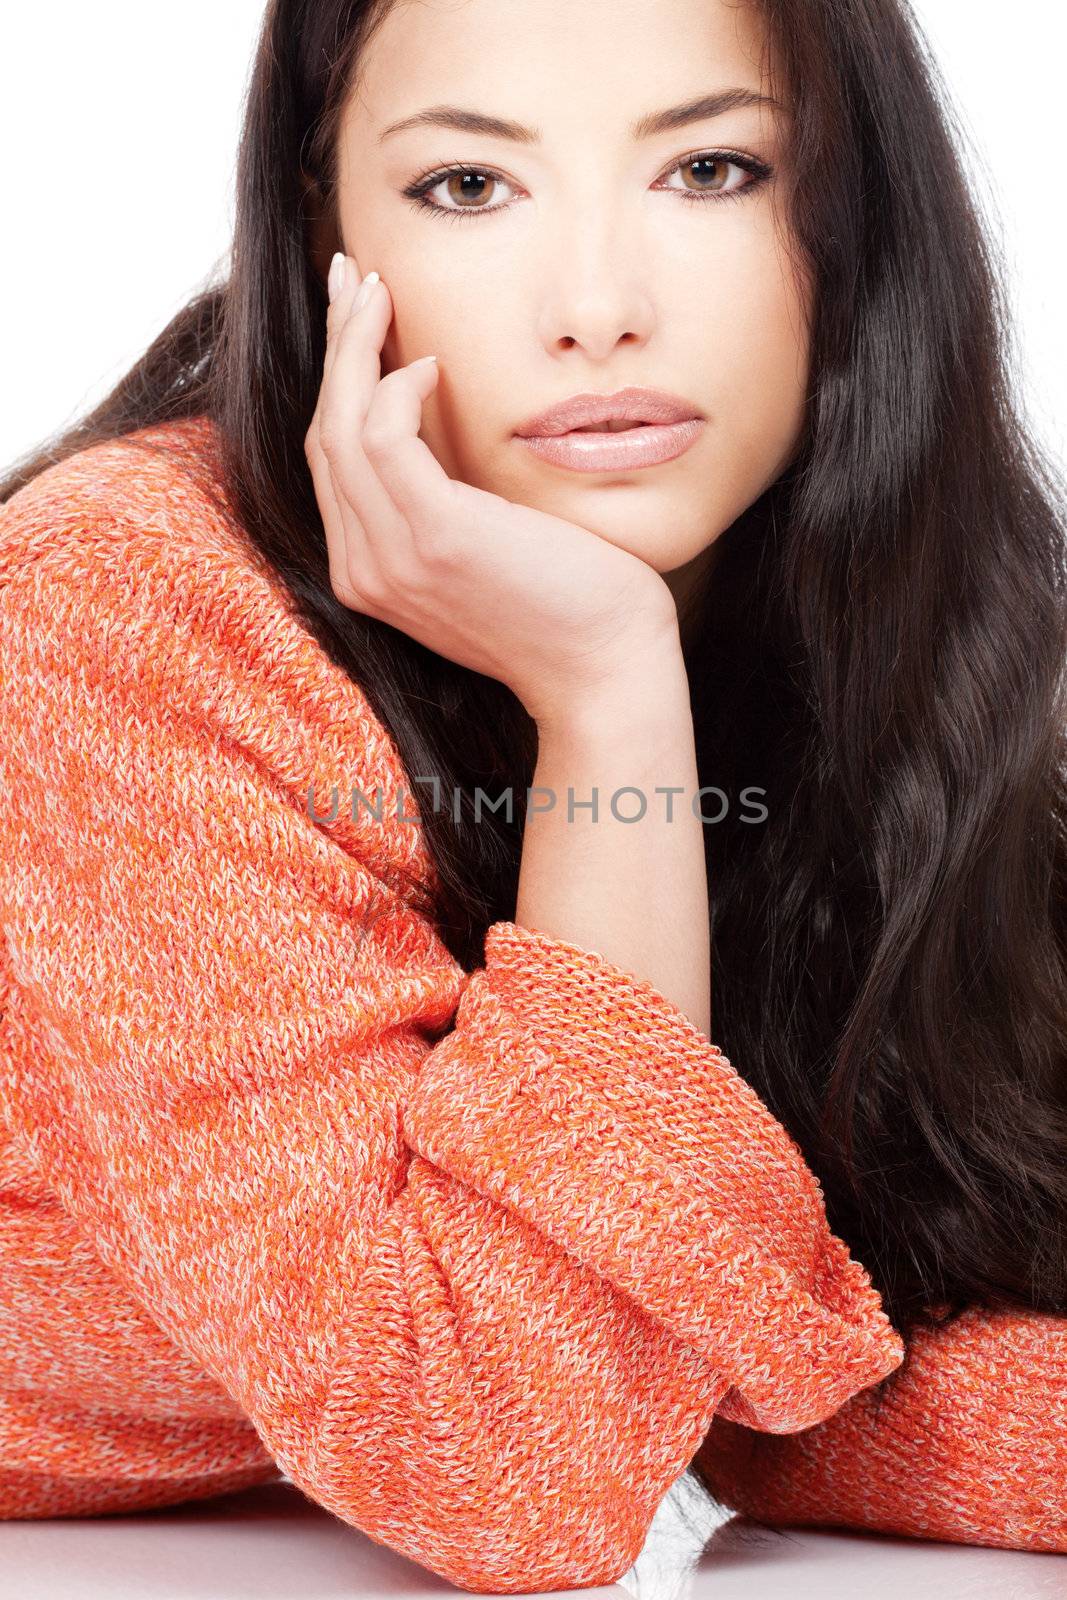 portrait of a young girl in a red orange wool sweater, isolated on white background